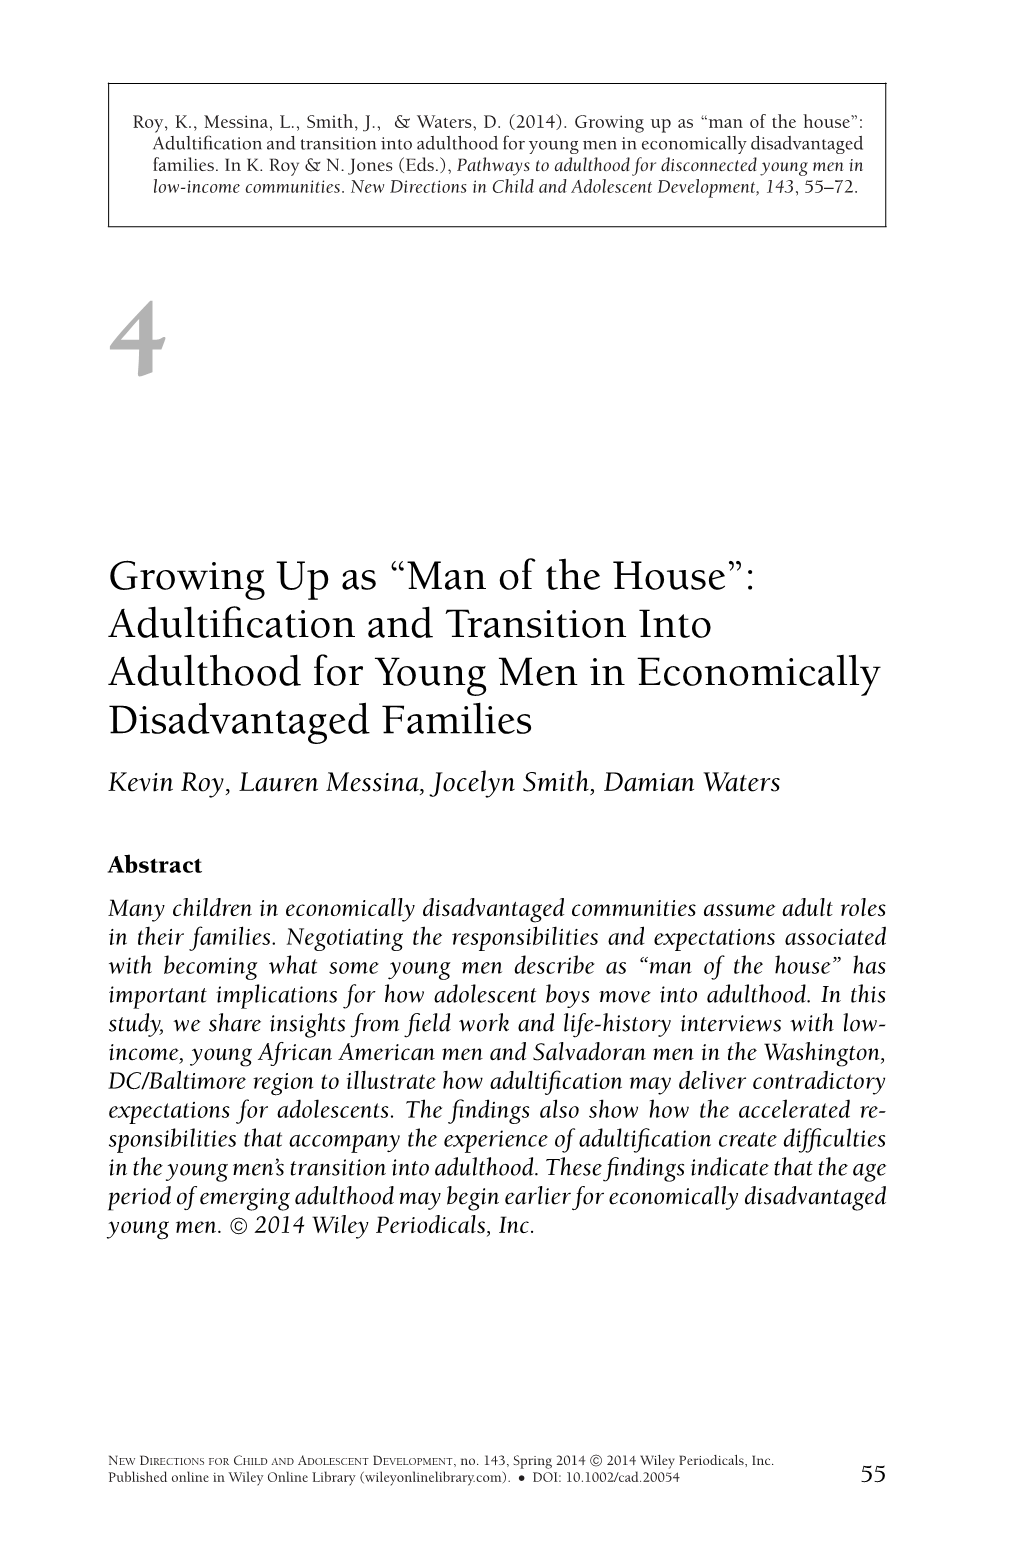 Growing up As Man of the House: Adultification and Transition Into